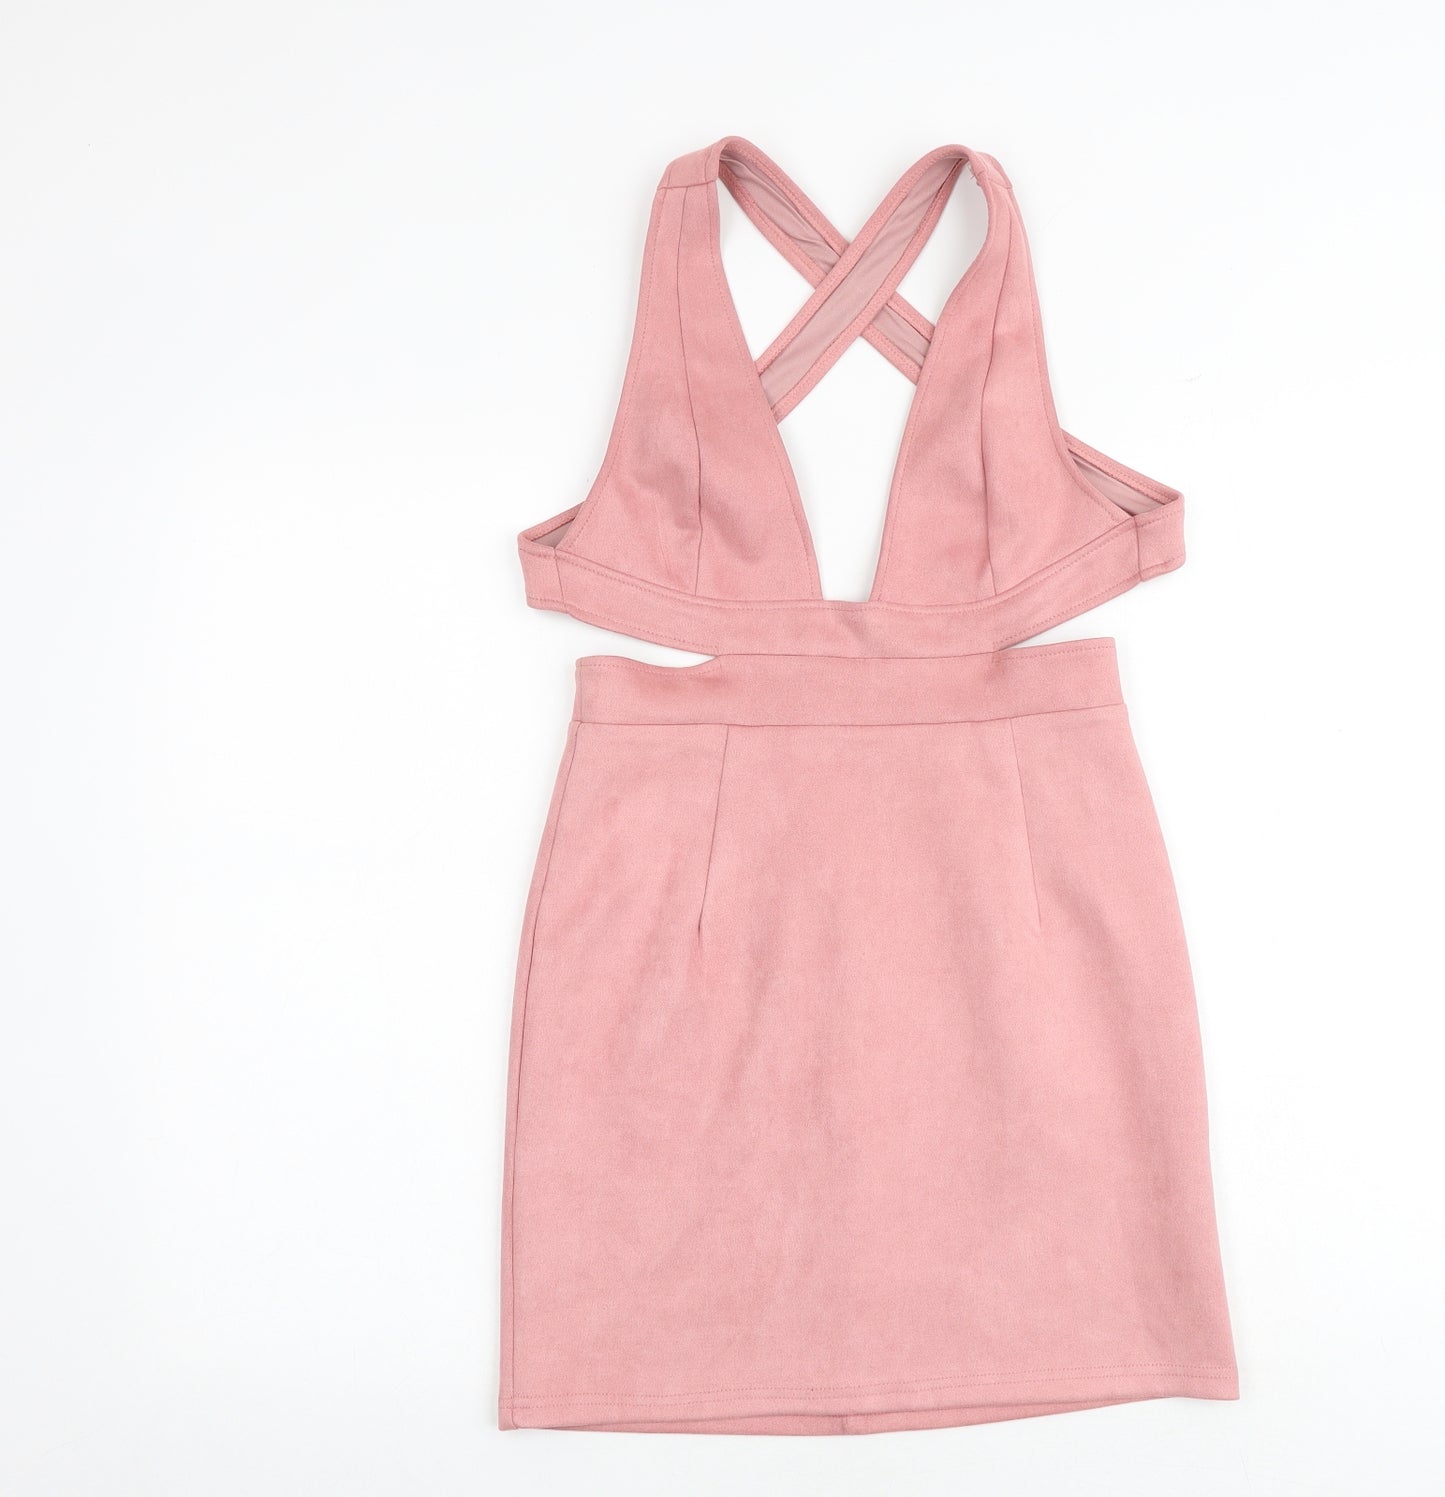 In the Style Womens Pink Polyester Pinafore/Dungaree Dress Size 10 V-Neck Zip - Pinafore, Open Back